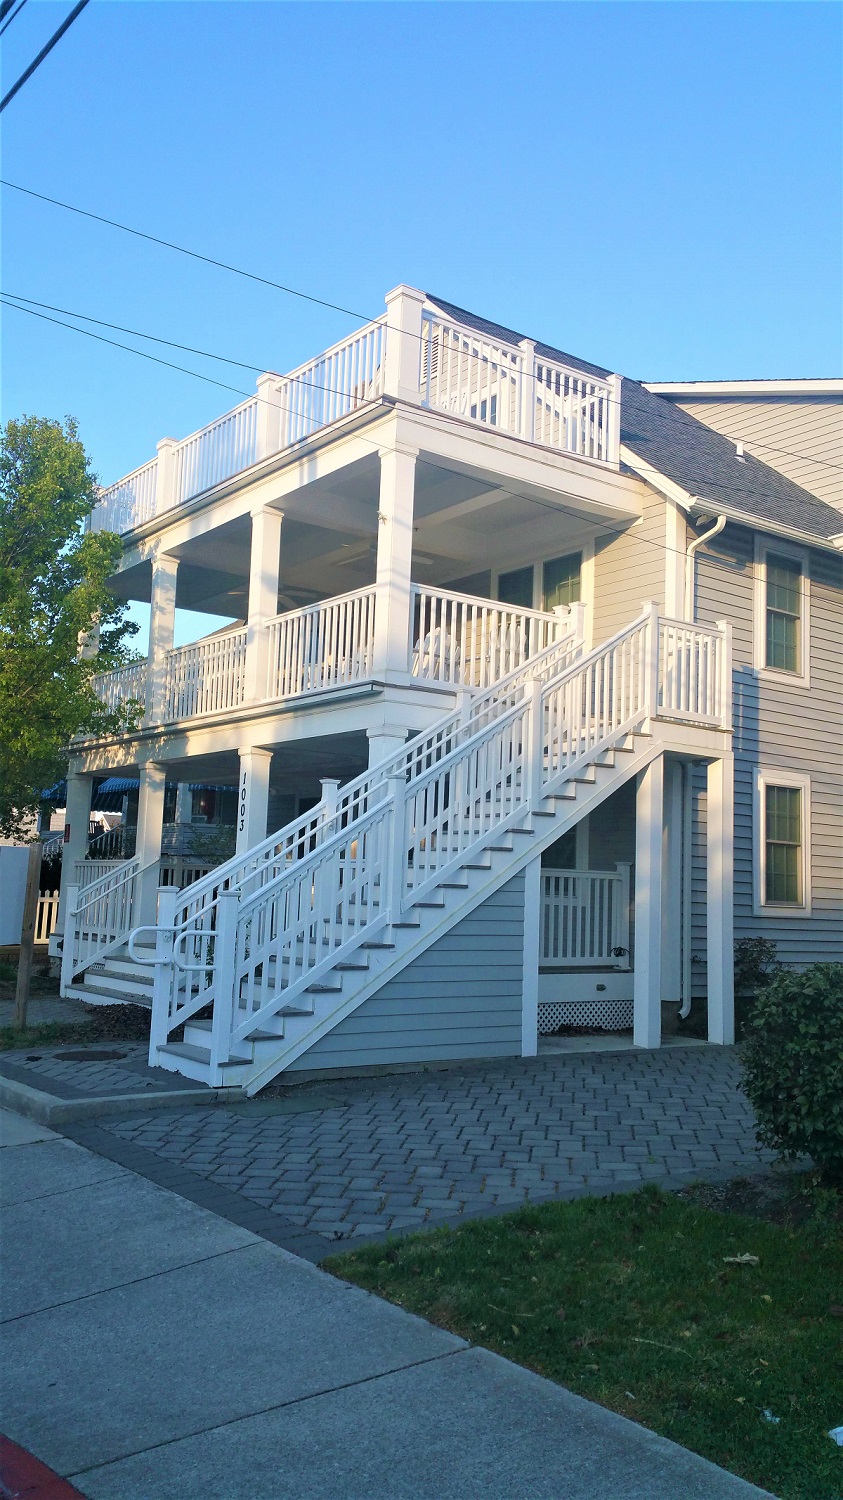 Large Beach House Vacation Rentals Ocean City, MD Vacation In OC